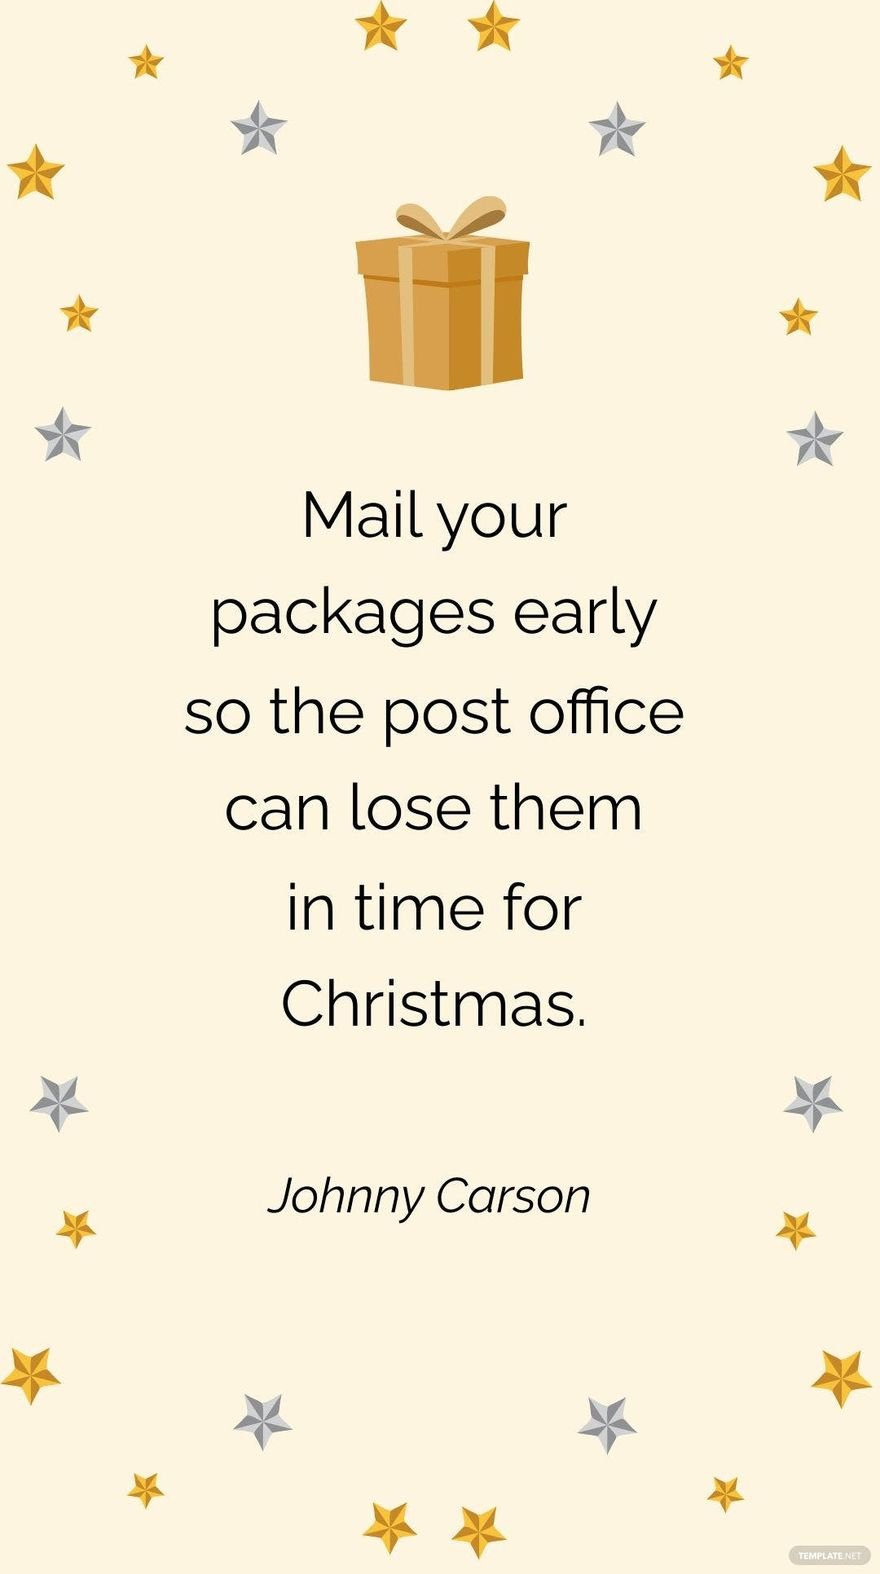 Johnny Carson - Mail your packages early so the post office can lose them in time for Christmas.